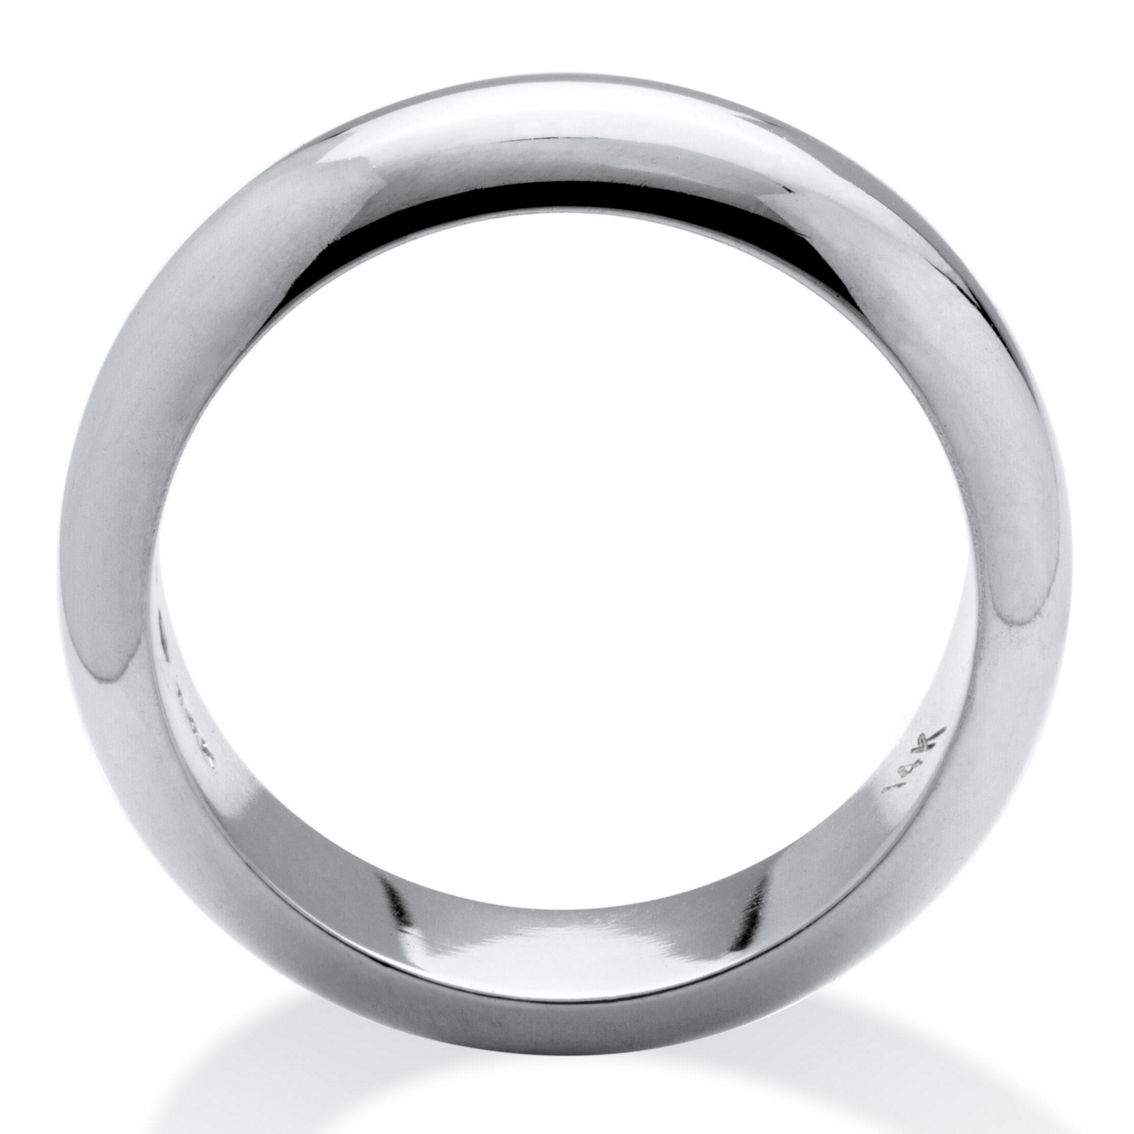 PalmBeach Wedding Band in 14k White Gold - Image 2 of 5